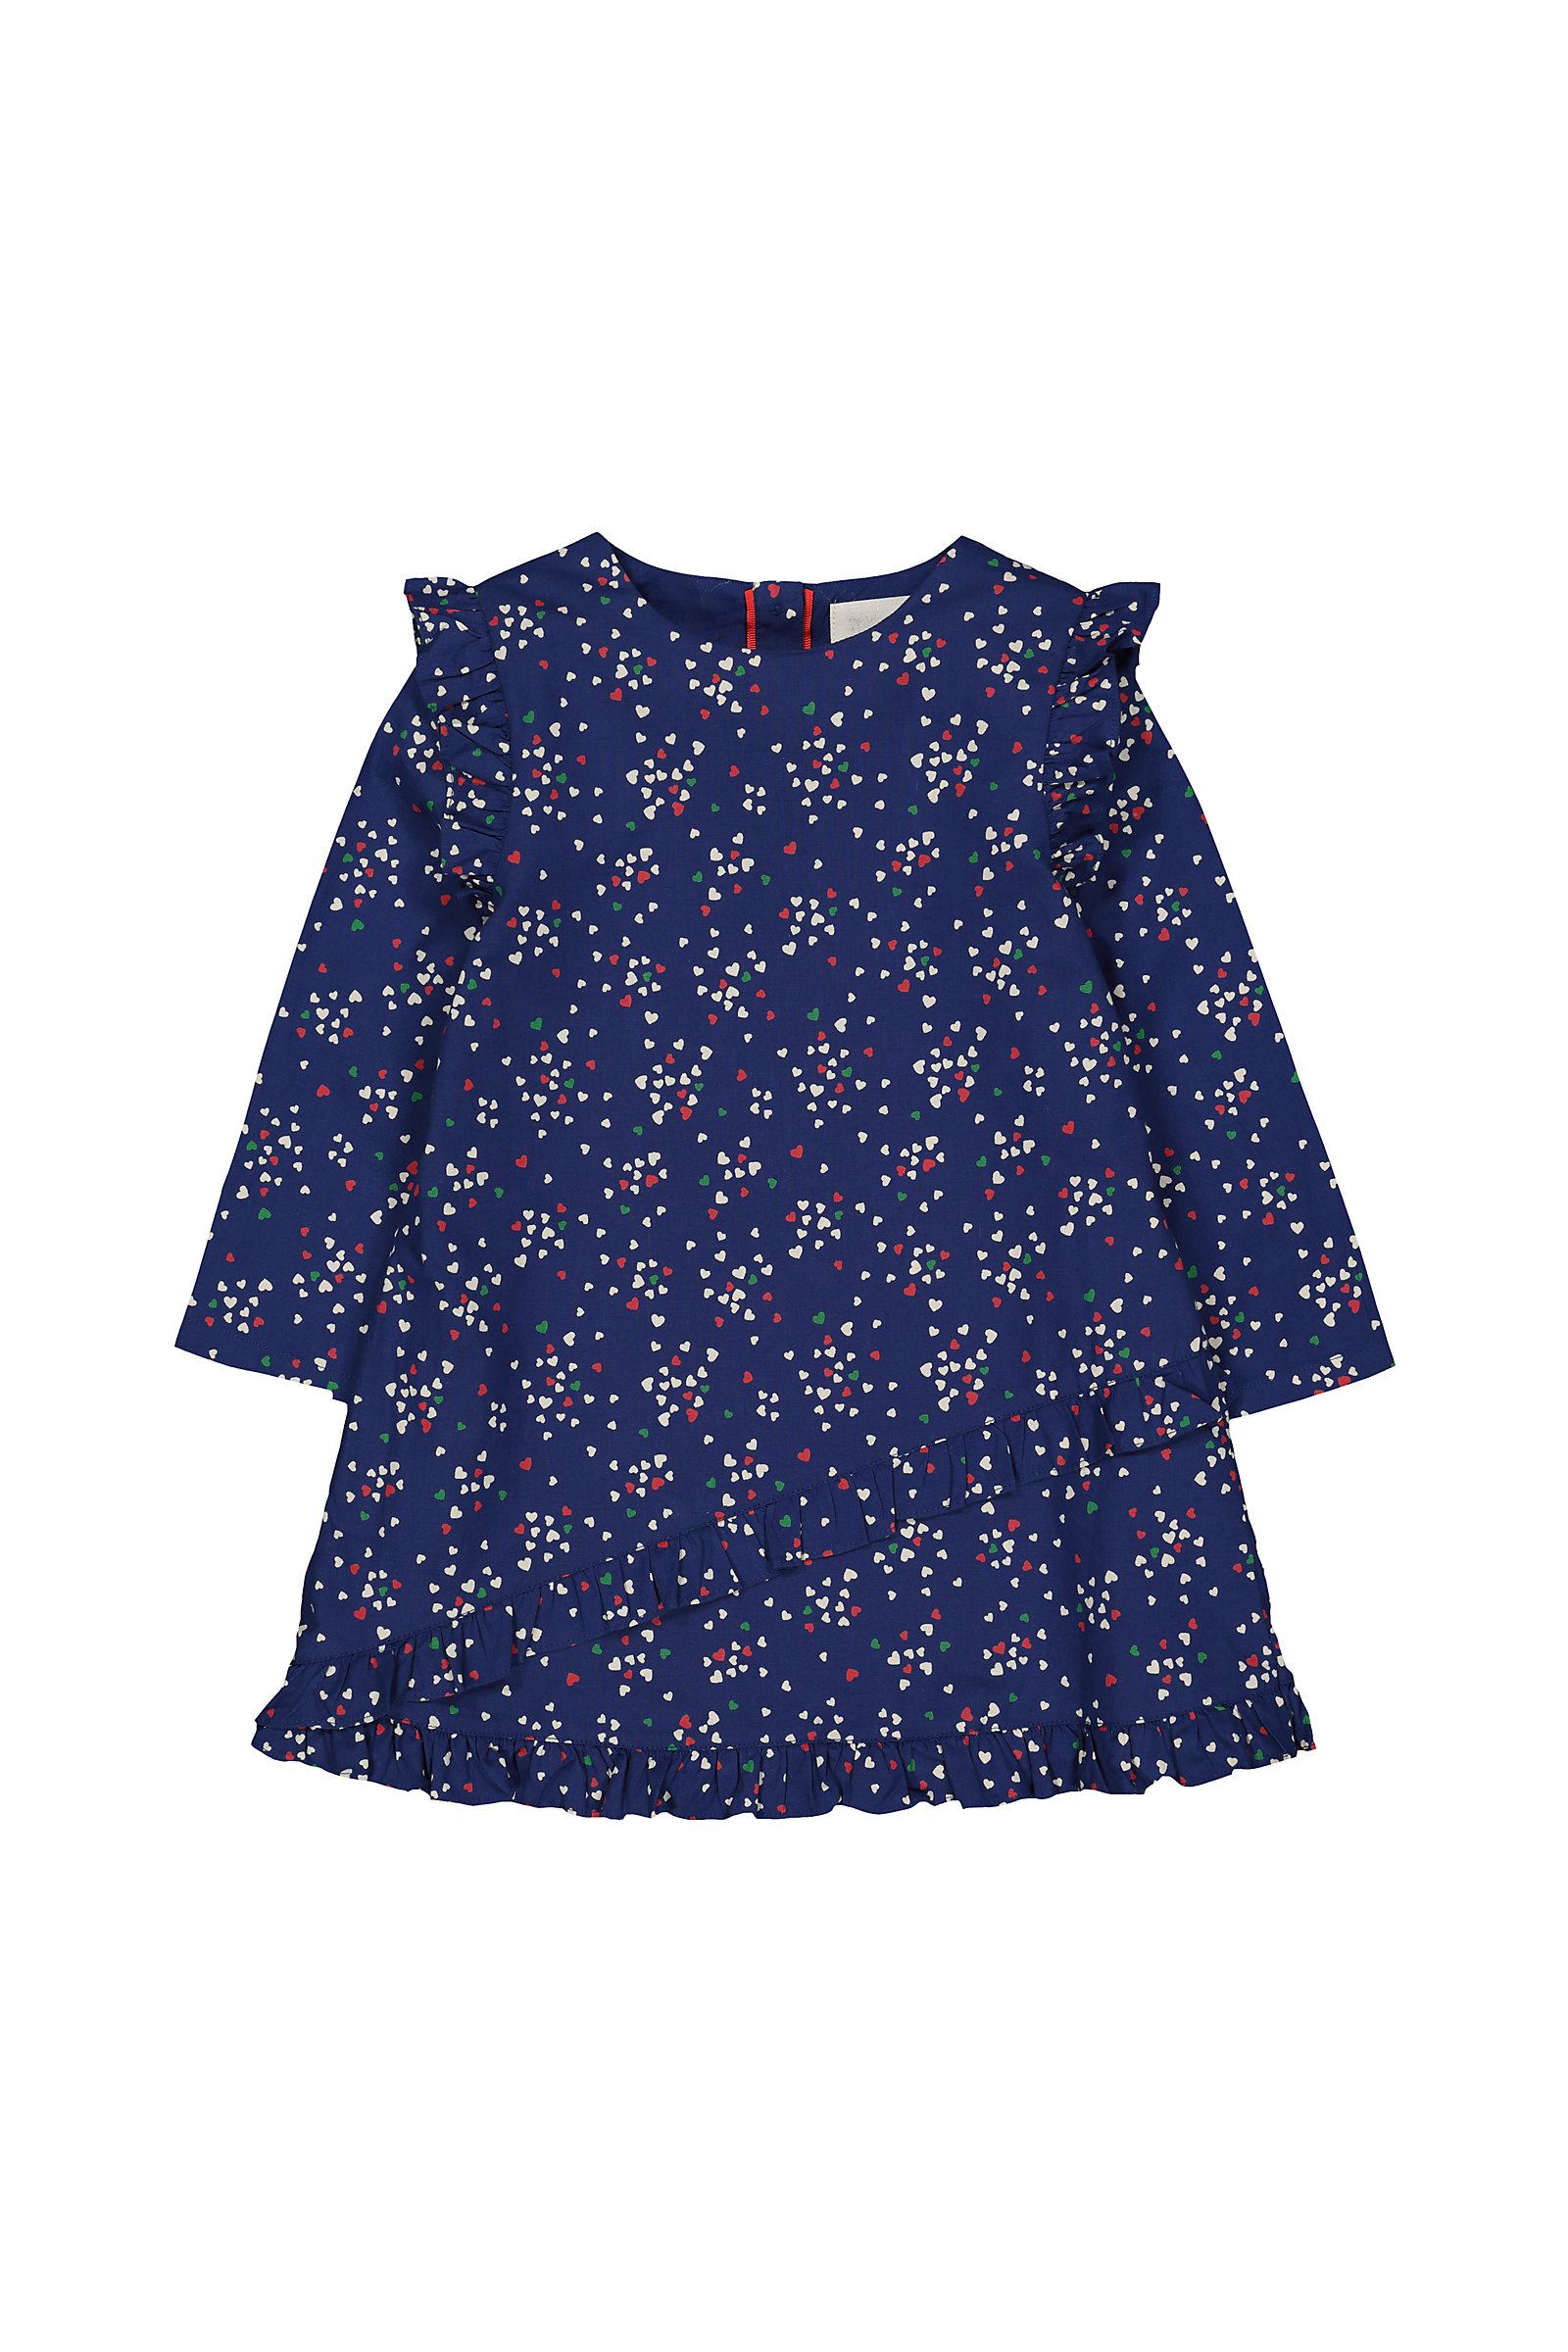 Mothercare Girls Printed Navy Dresses